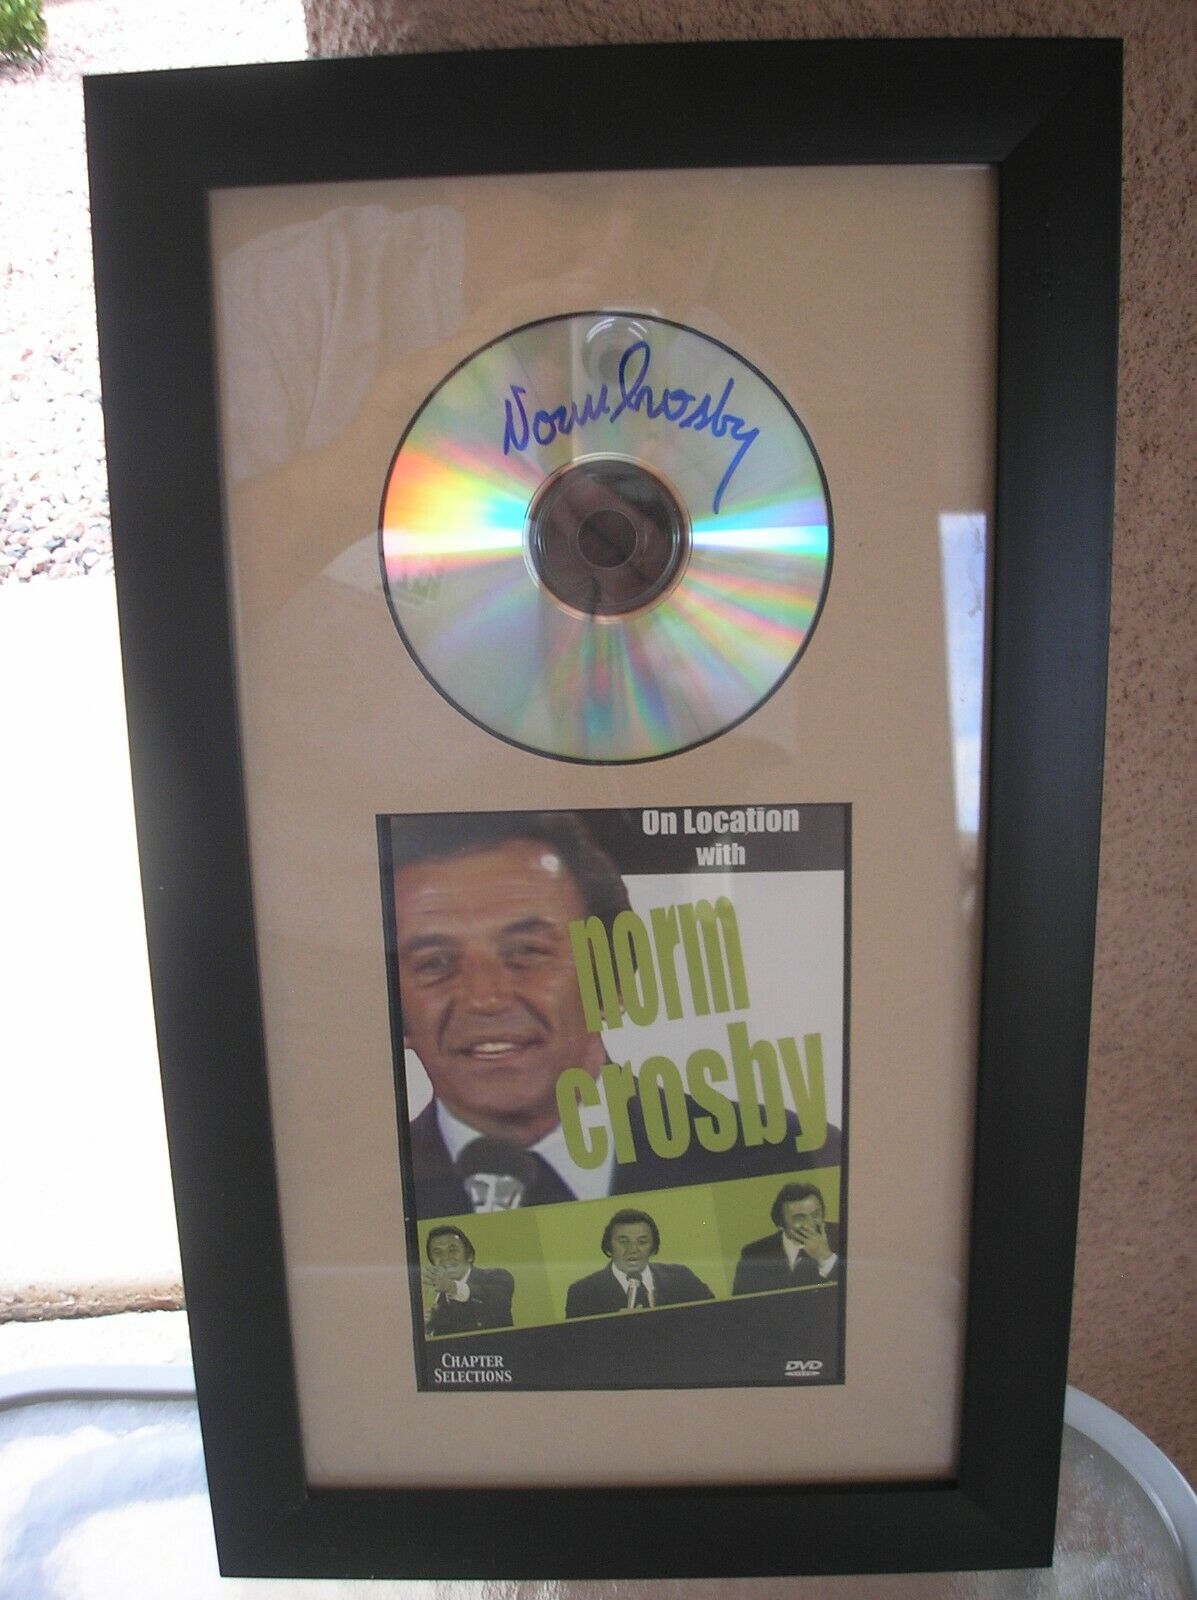 Comedian NORM CROSBY Signed Framed DVD King of MALAPROPISMS DIED 11-8-2020